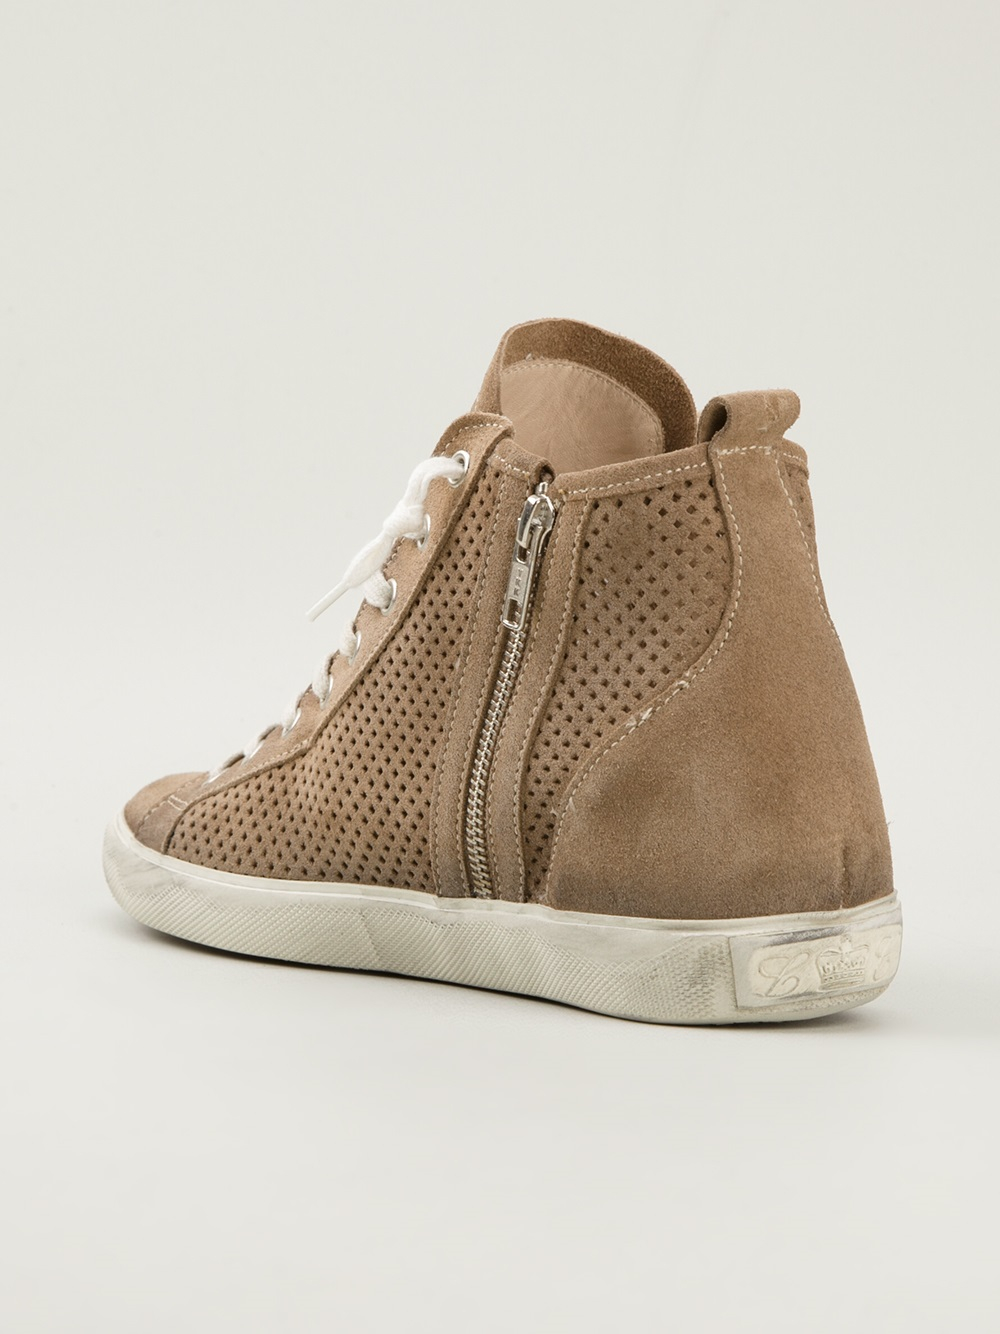 Lyst Leather Crown Perforated Hitop Sneakers In Brown 0598